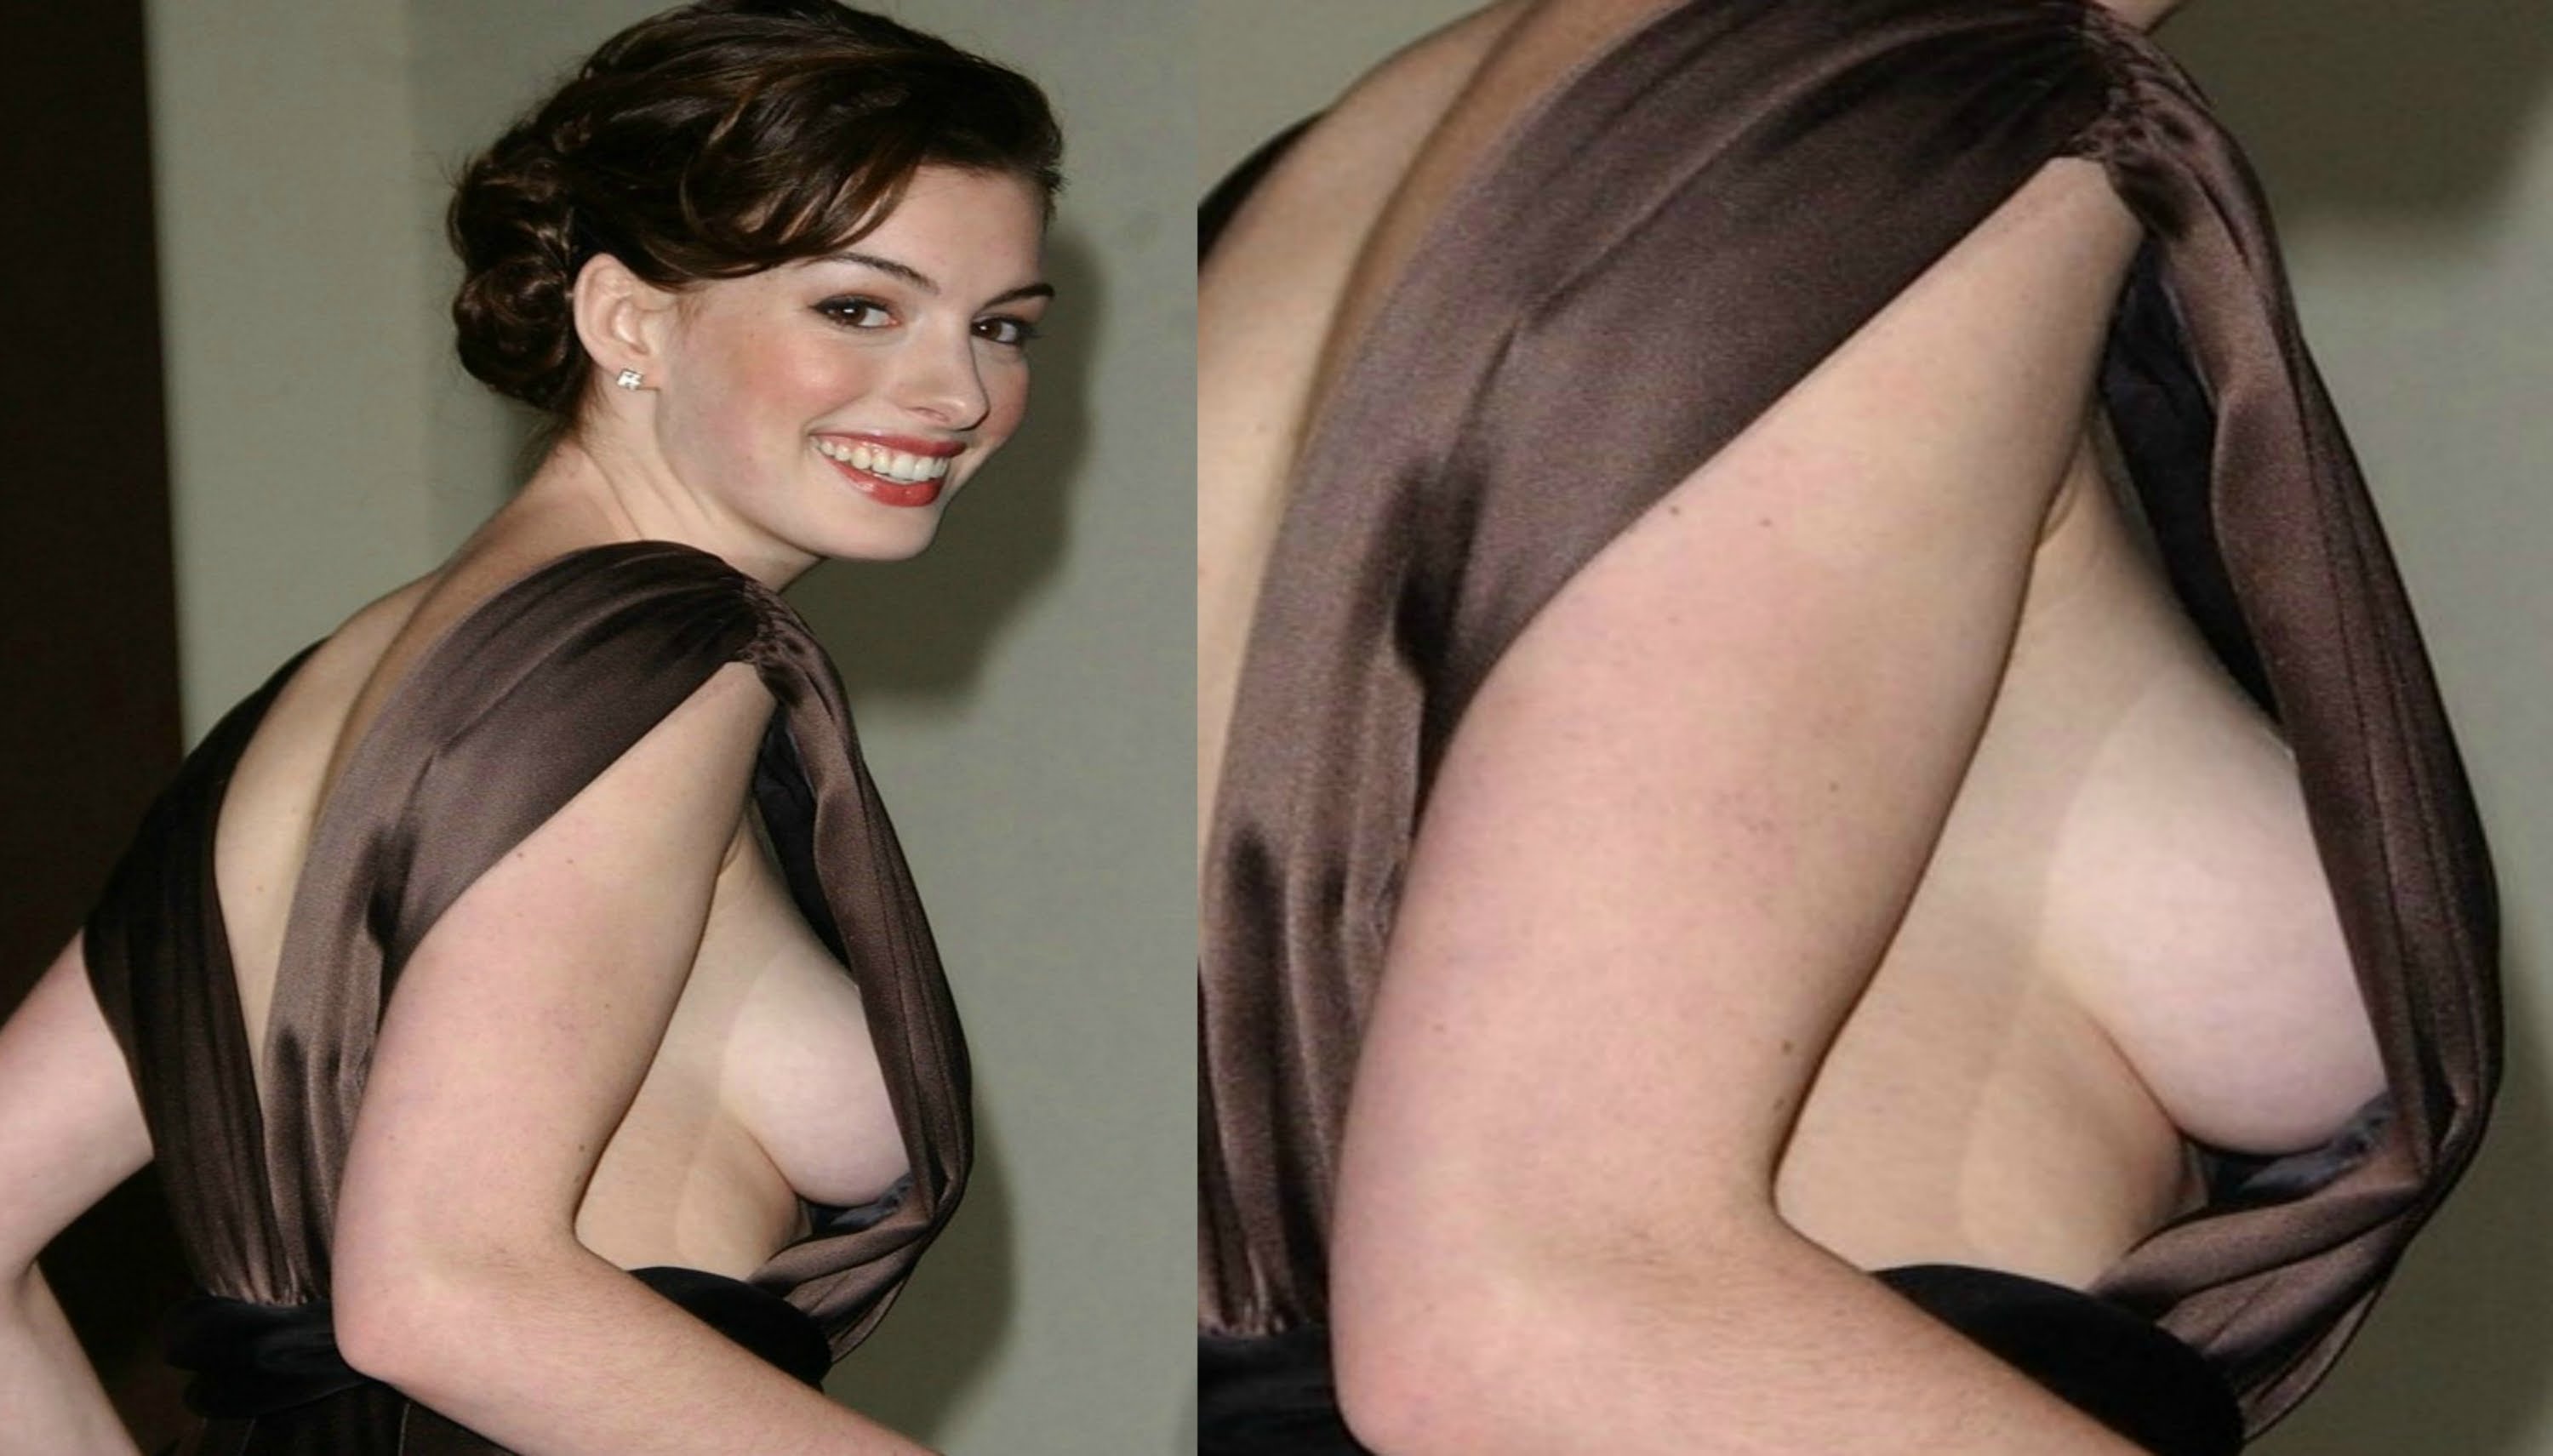 Naked Photos Of Anne Hathaway